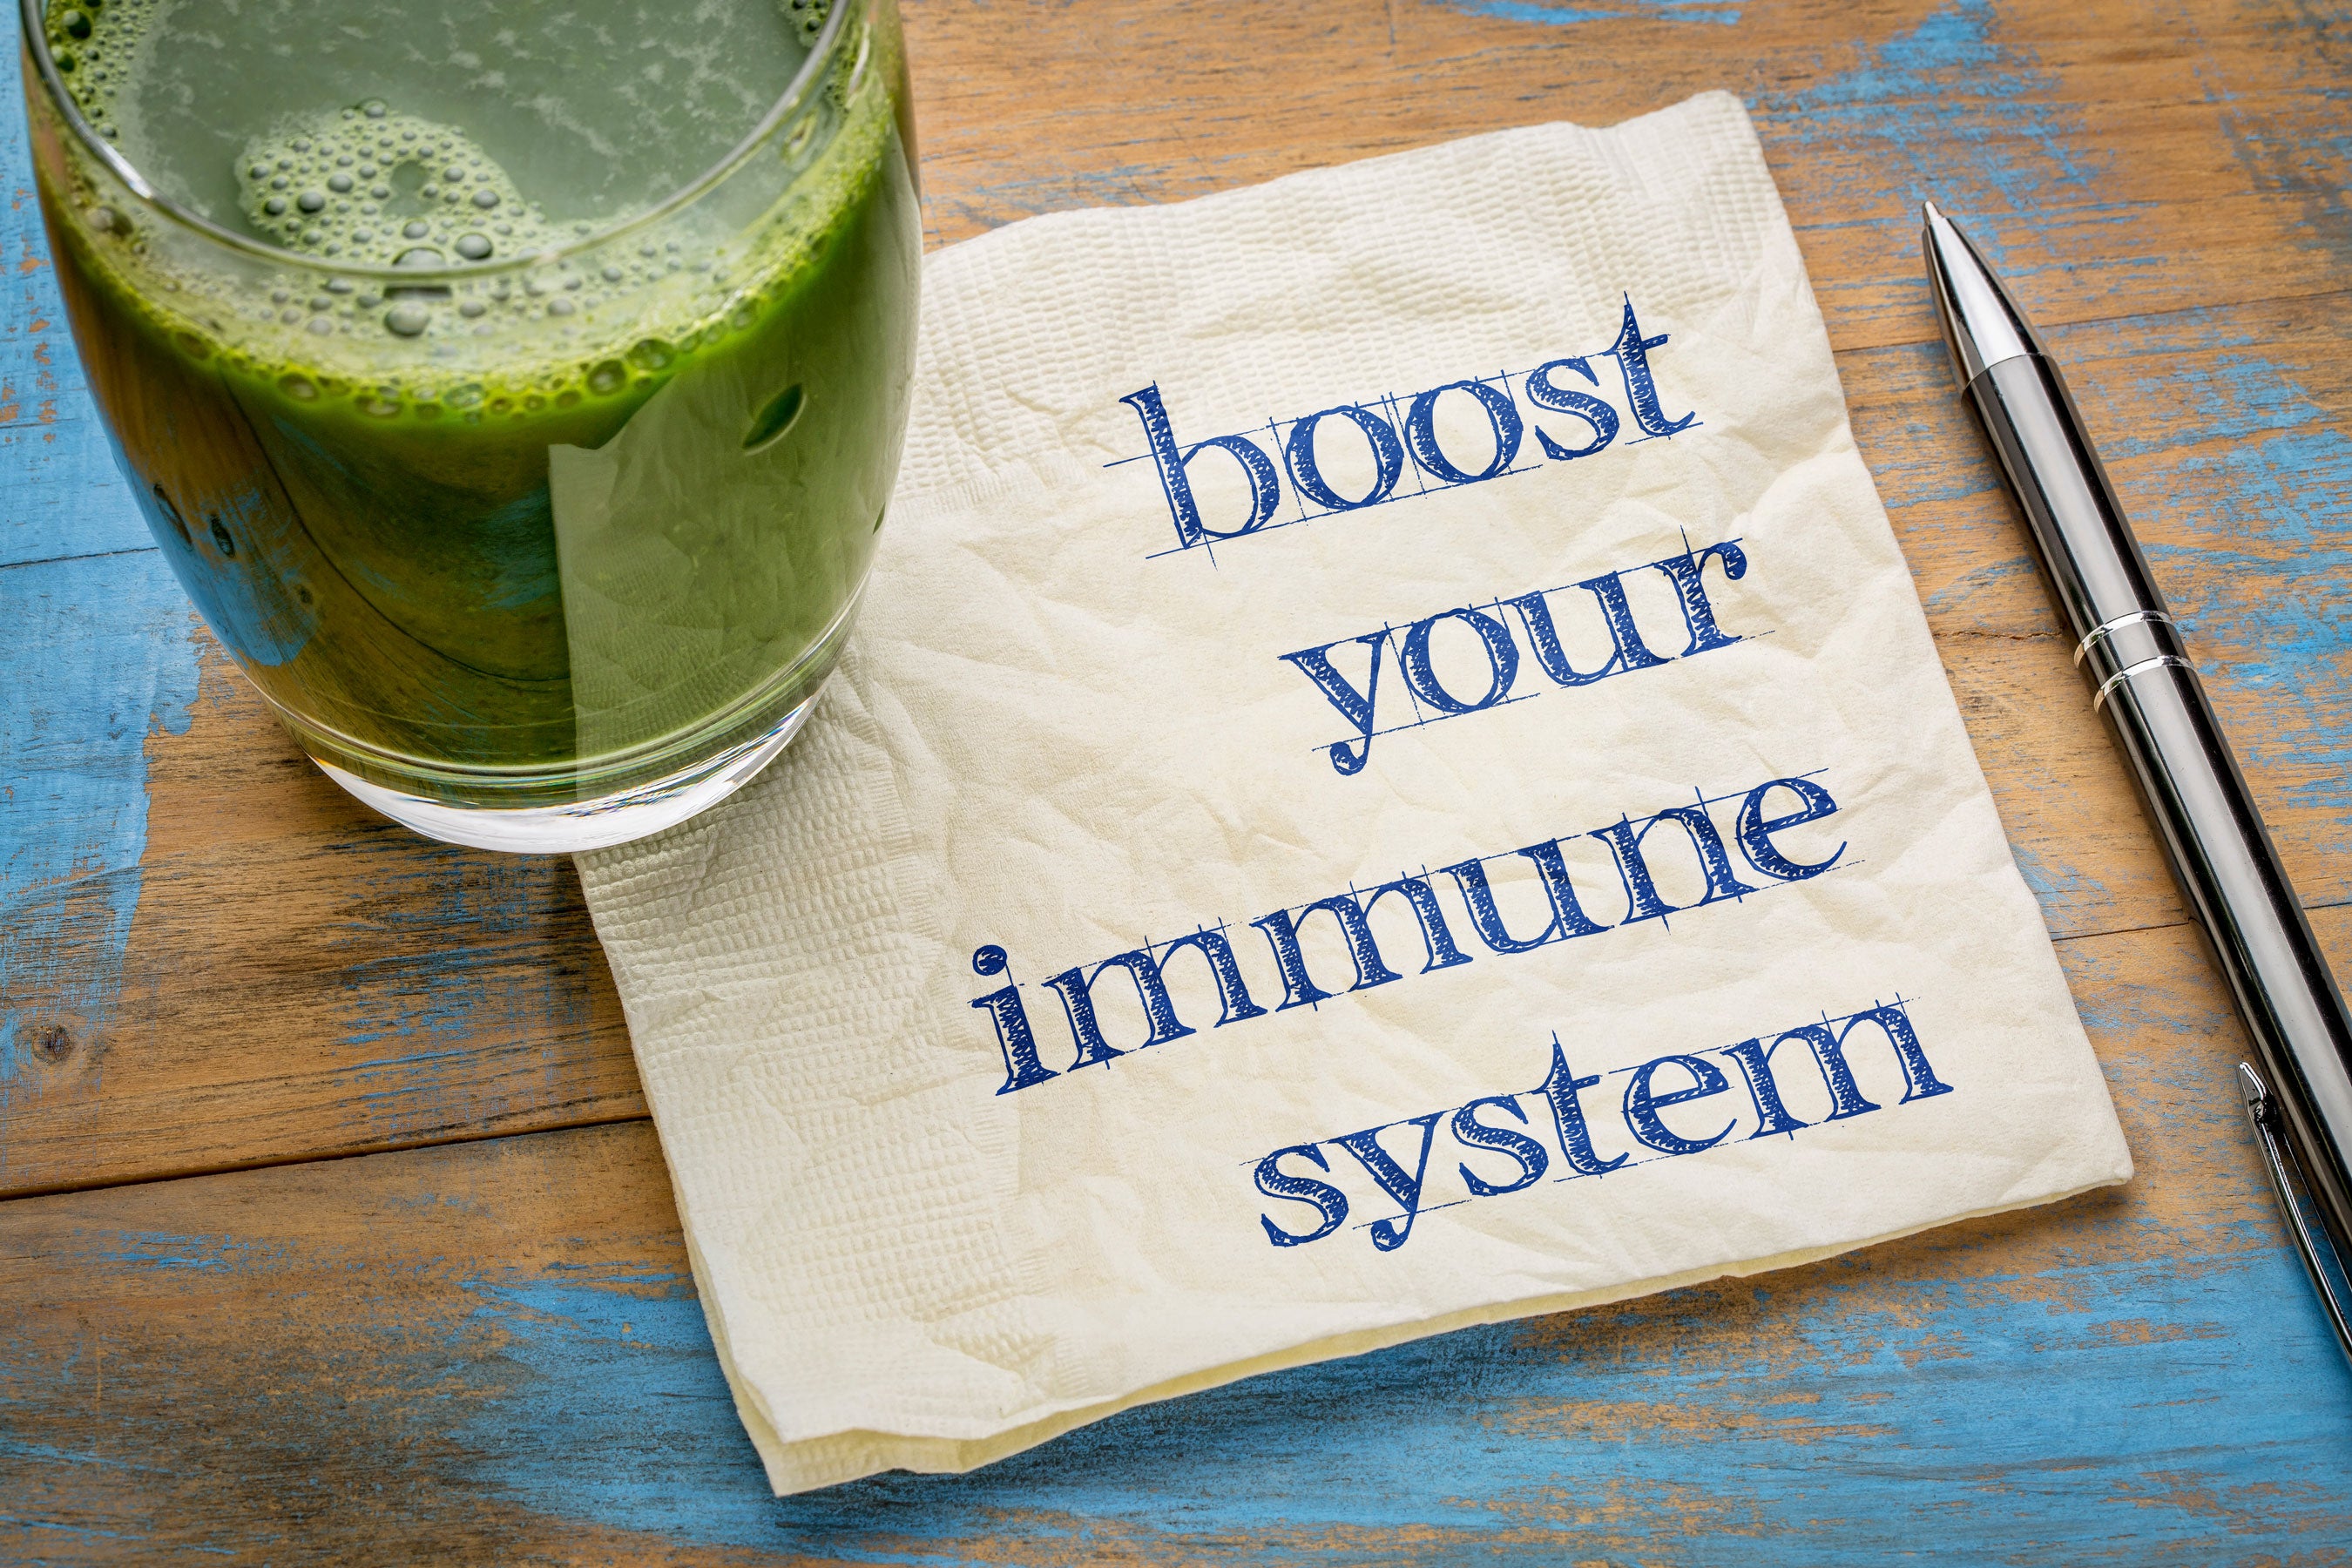 How to Build Your Immune System